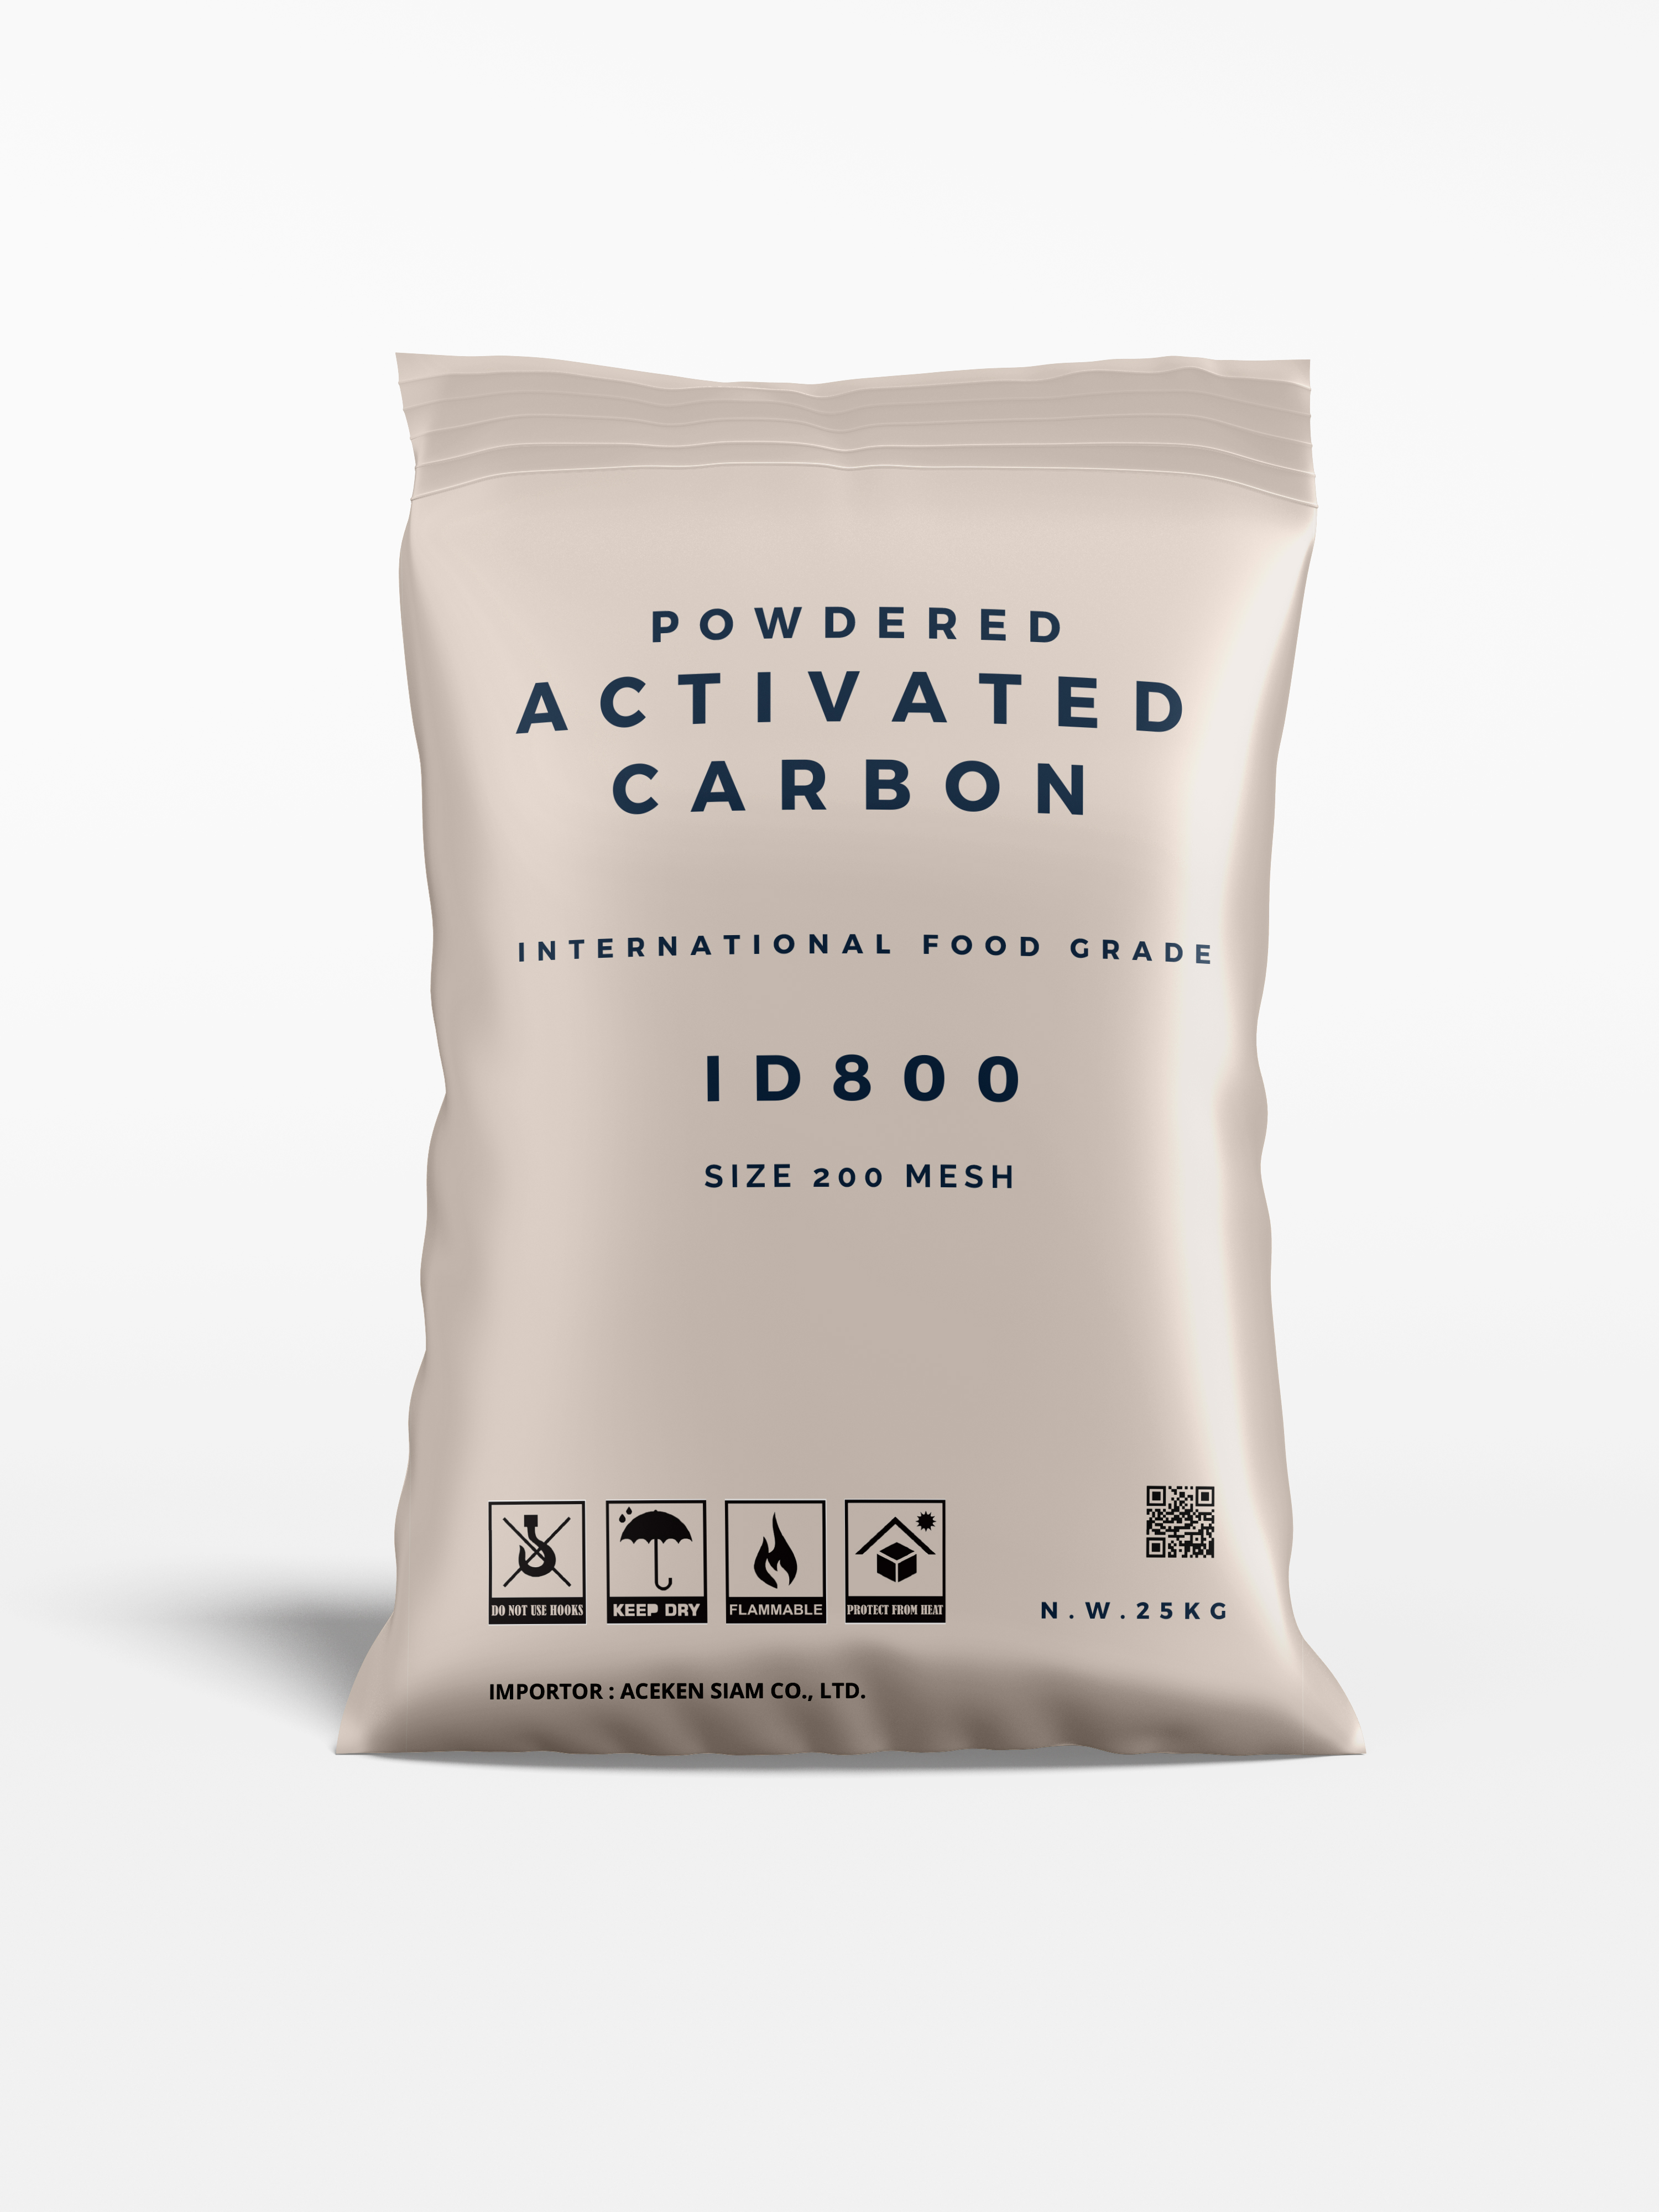 Powdered Activated Carbon ID800 size 200 mesh International Food Grade